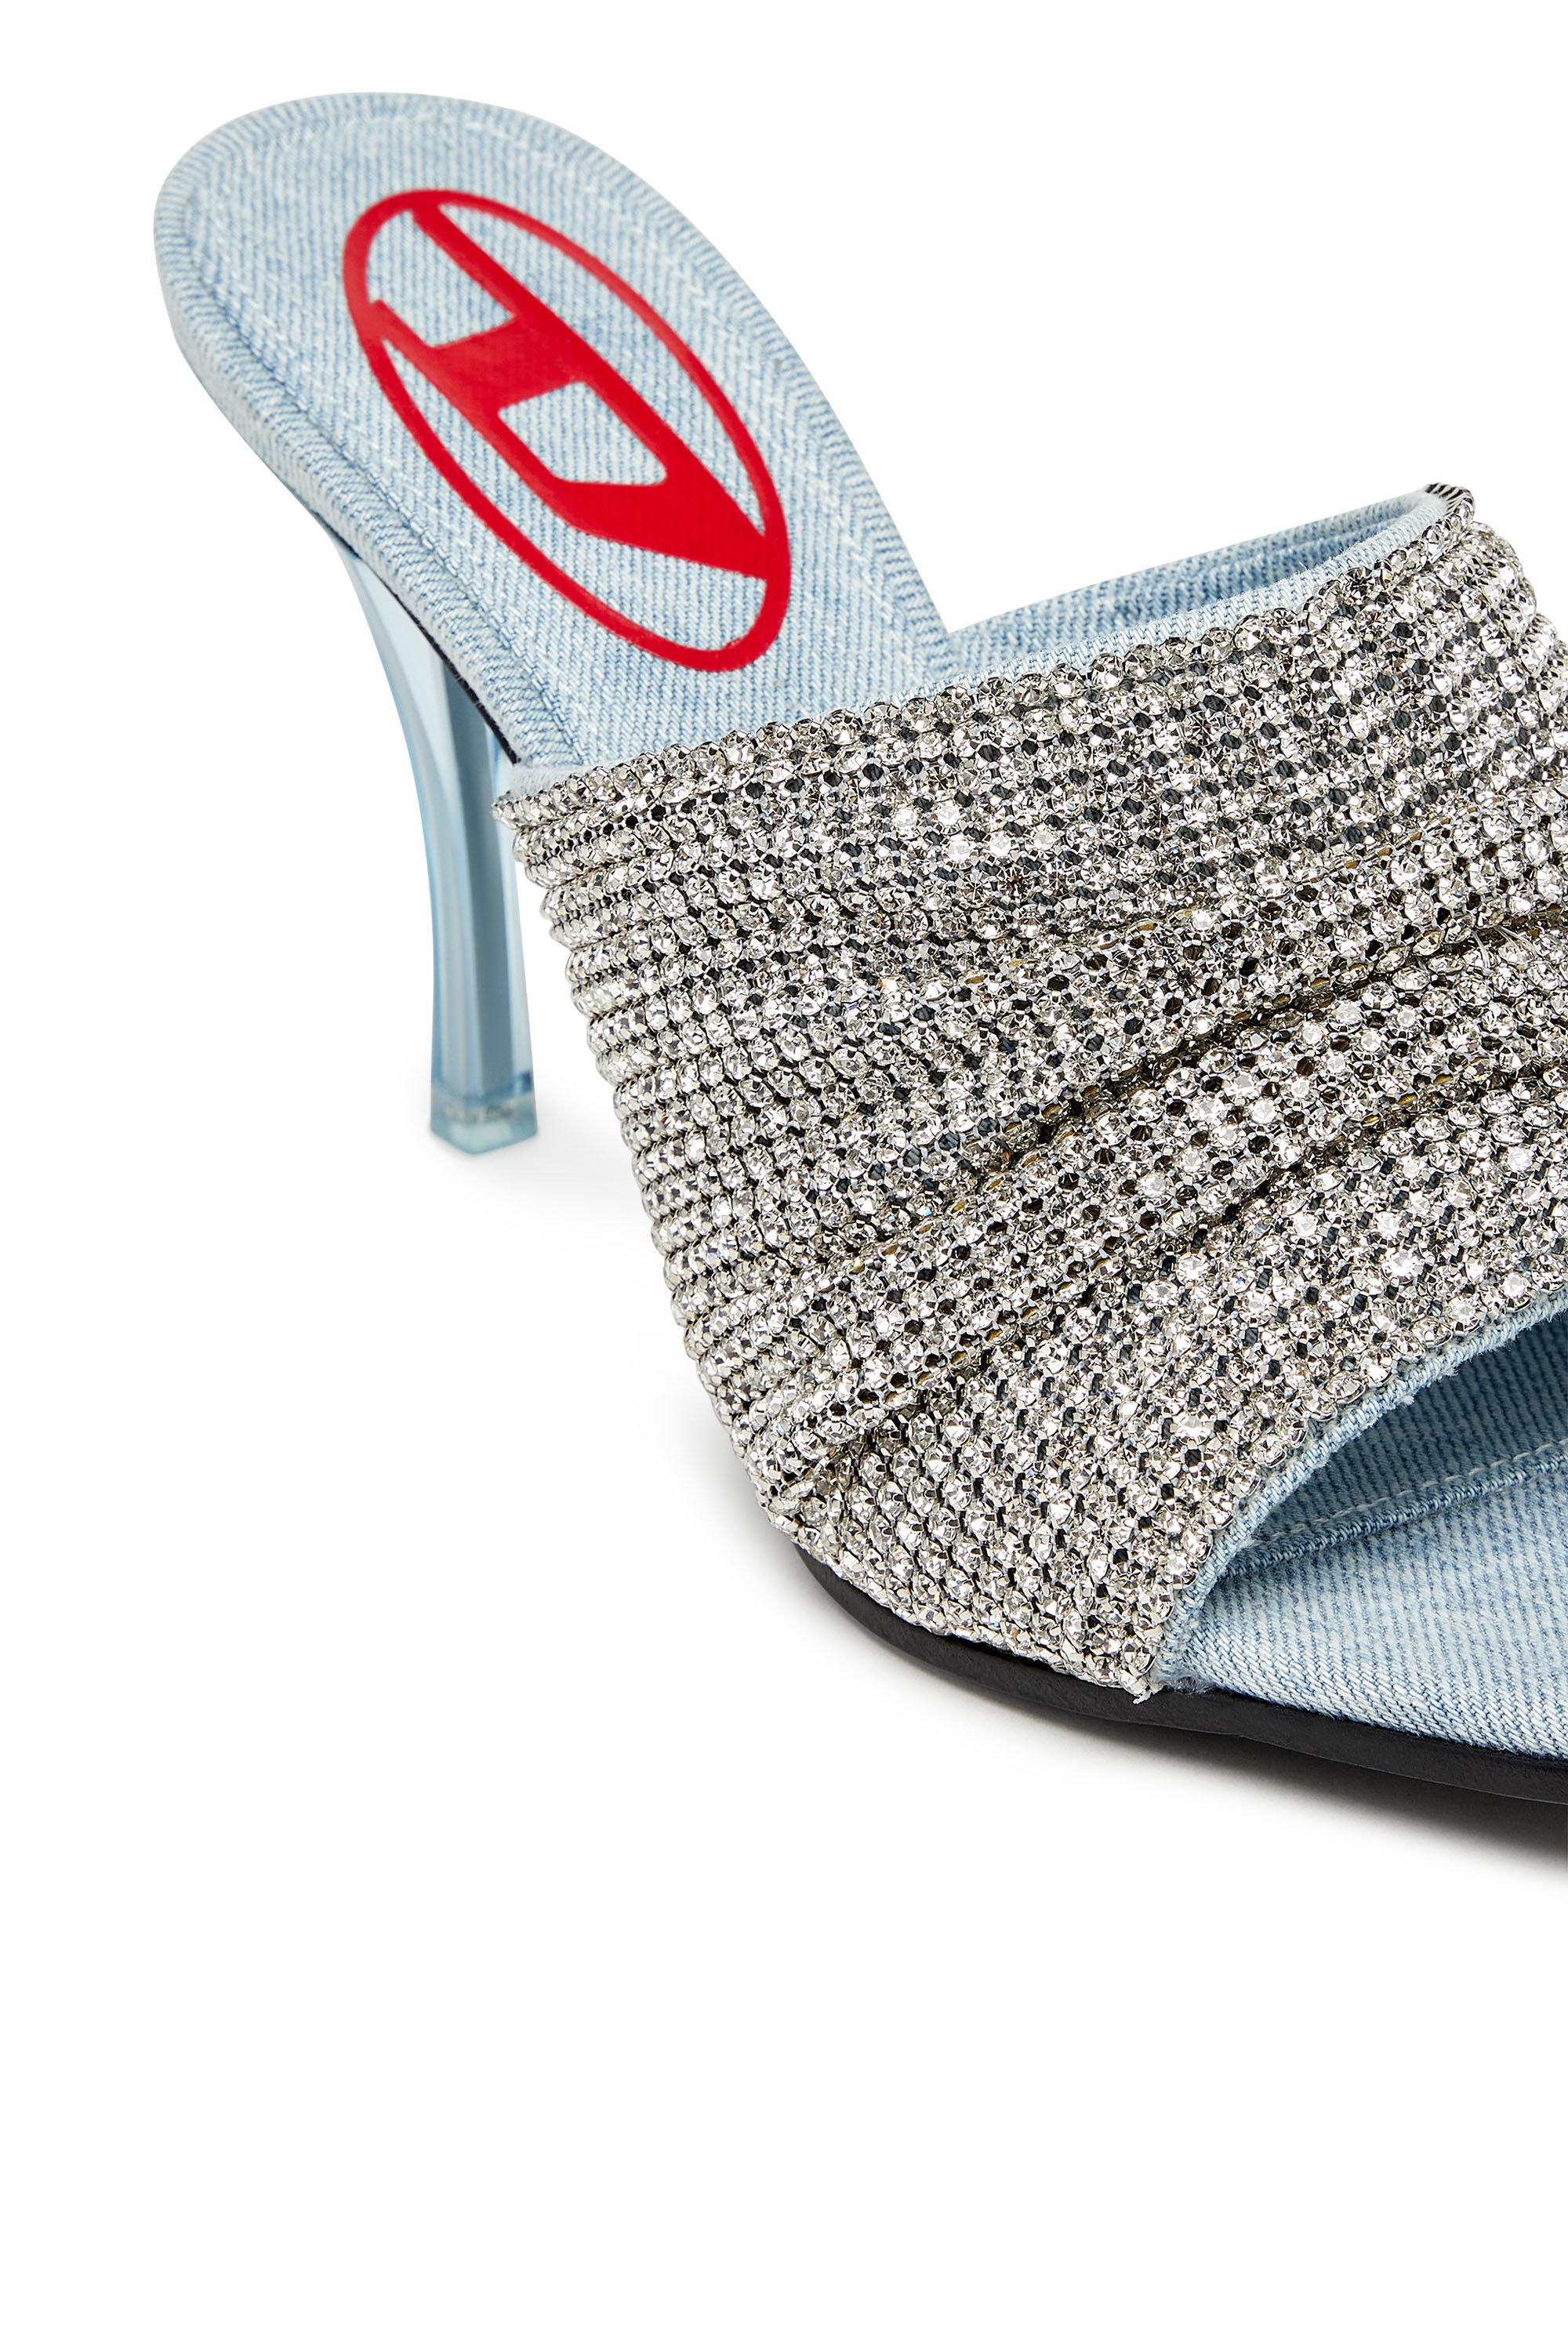 Diesel - D-SYDNEY SDL S, Female D-Sydney Sdl S Sandals - Mule sandals with rhinestone band in Silver - Image 5